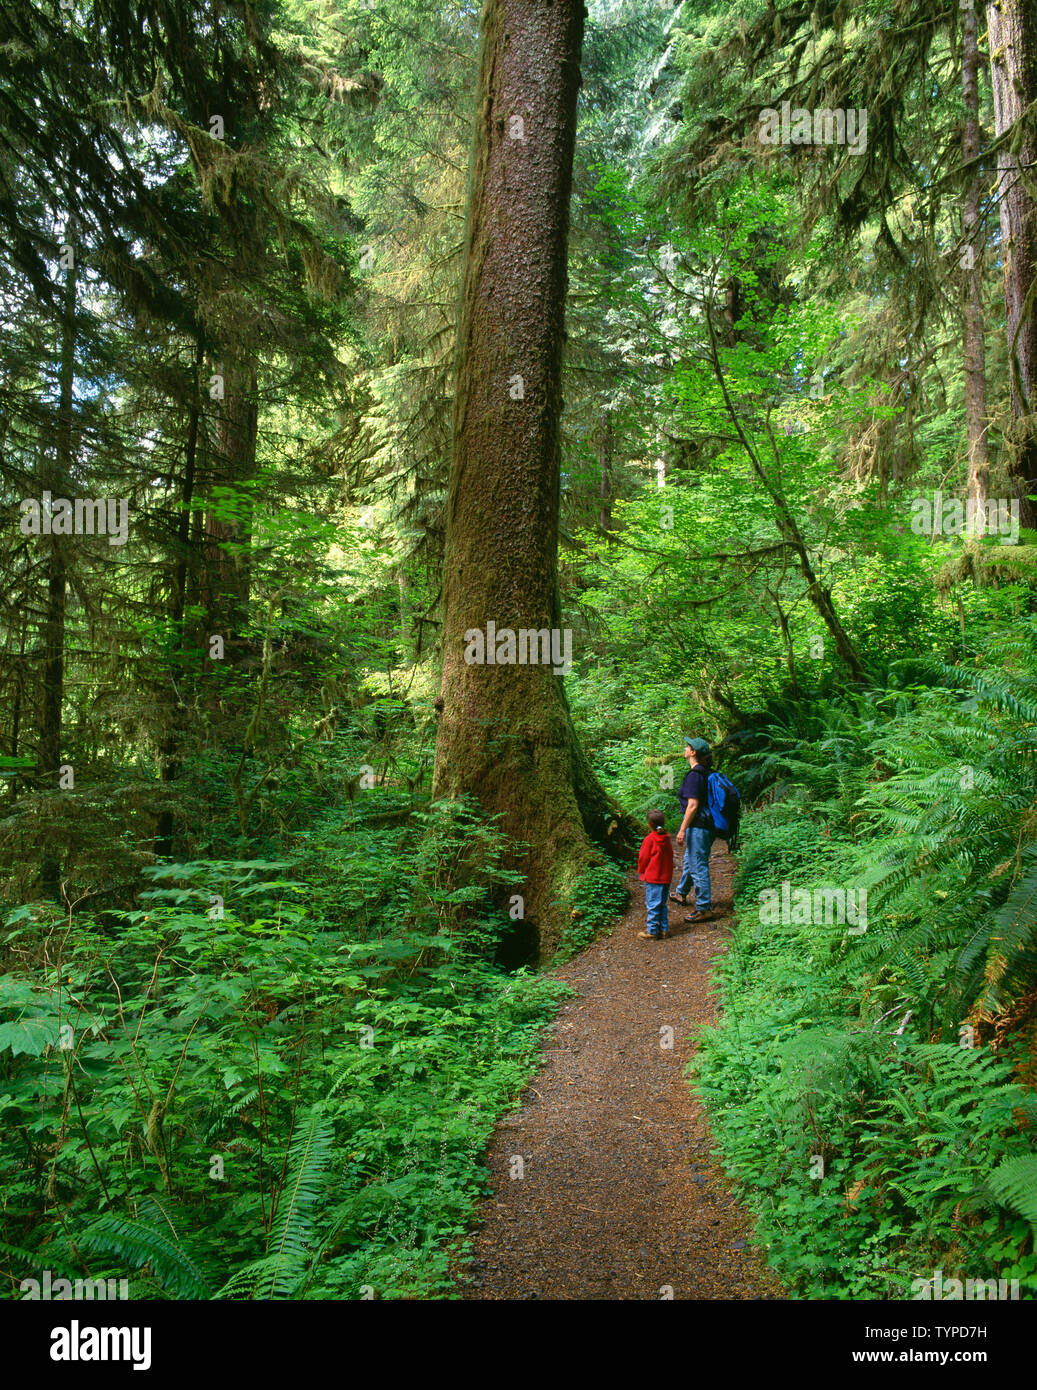 USA, Washington, Olympic National Park, Mother and daughter pause while hiking to view temperate rain forest in the Quinault Valley. Stock Photo